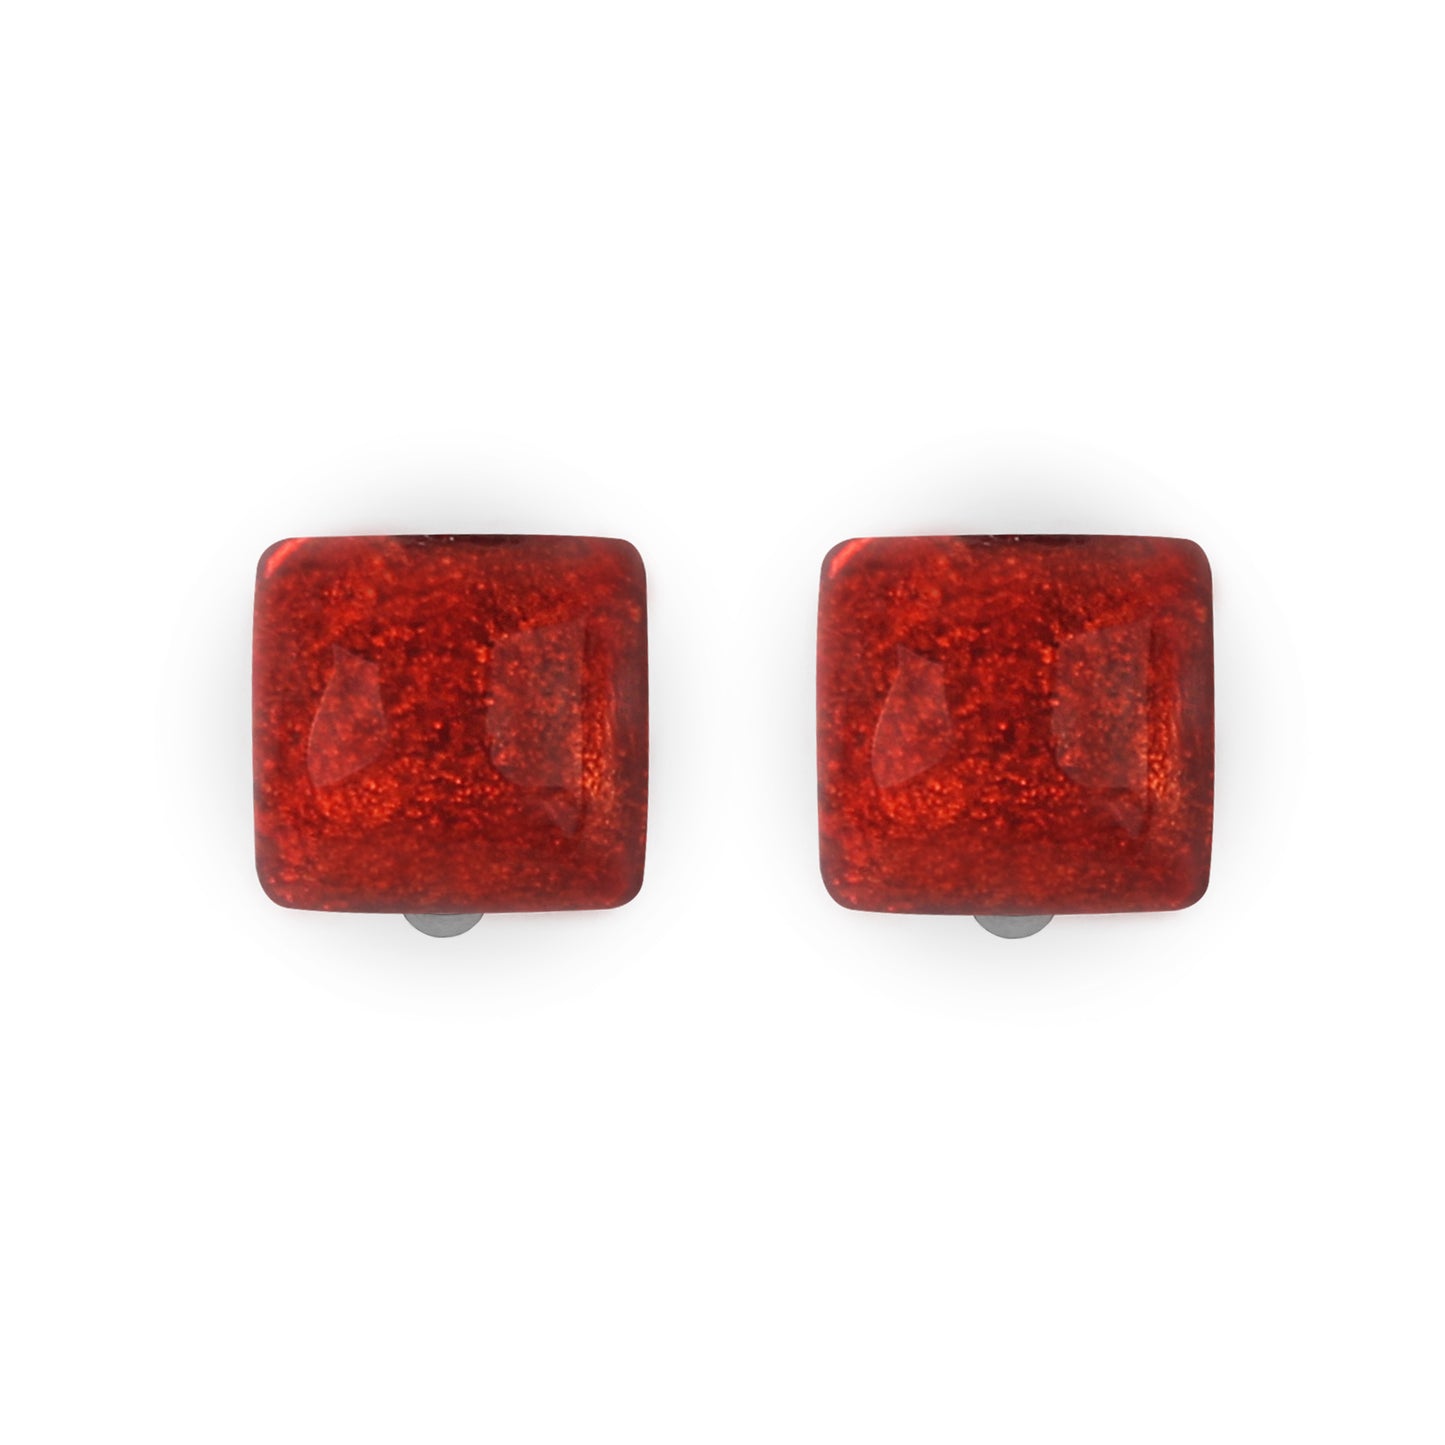 Maple Cabouchon Squares Shiny Clip Earrings